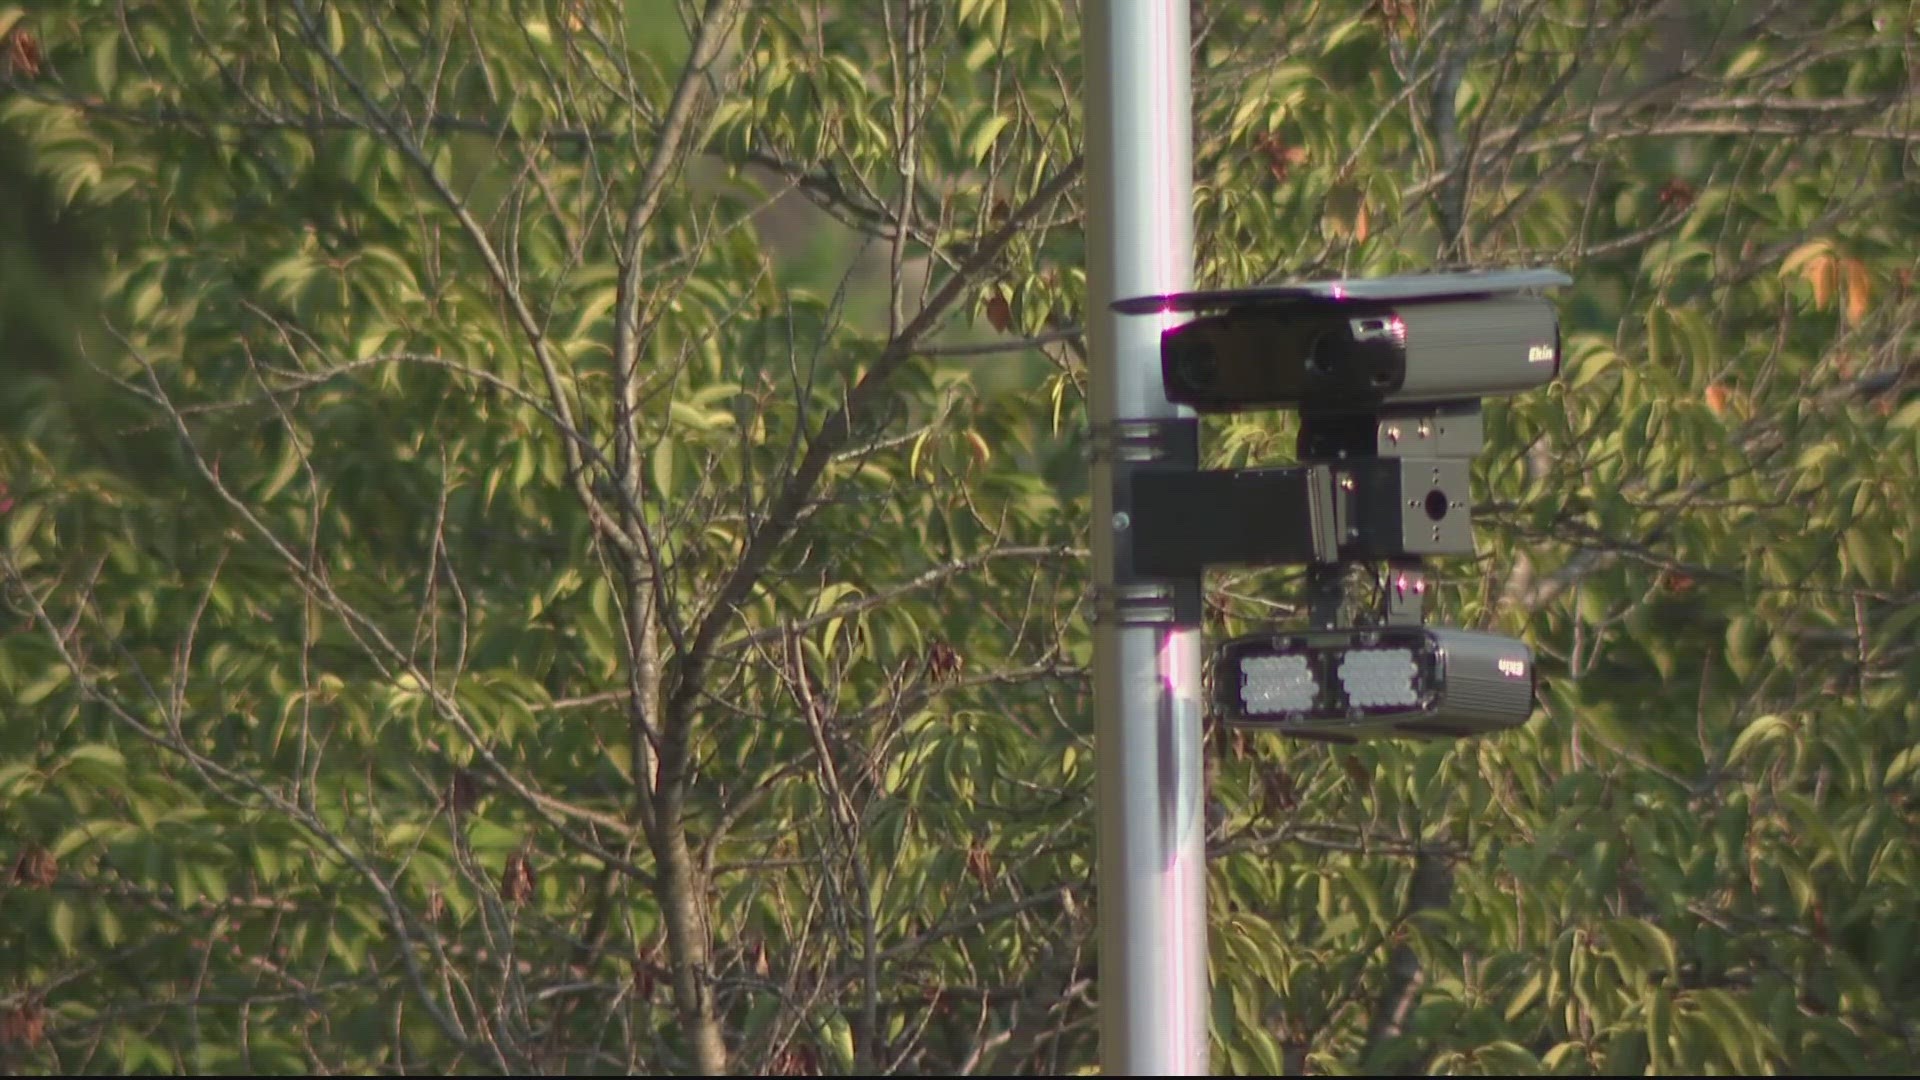 There will be a 30-day warning period in place to allow drivers to adjust to the new camera locations.